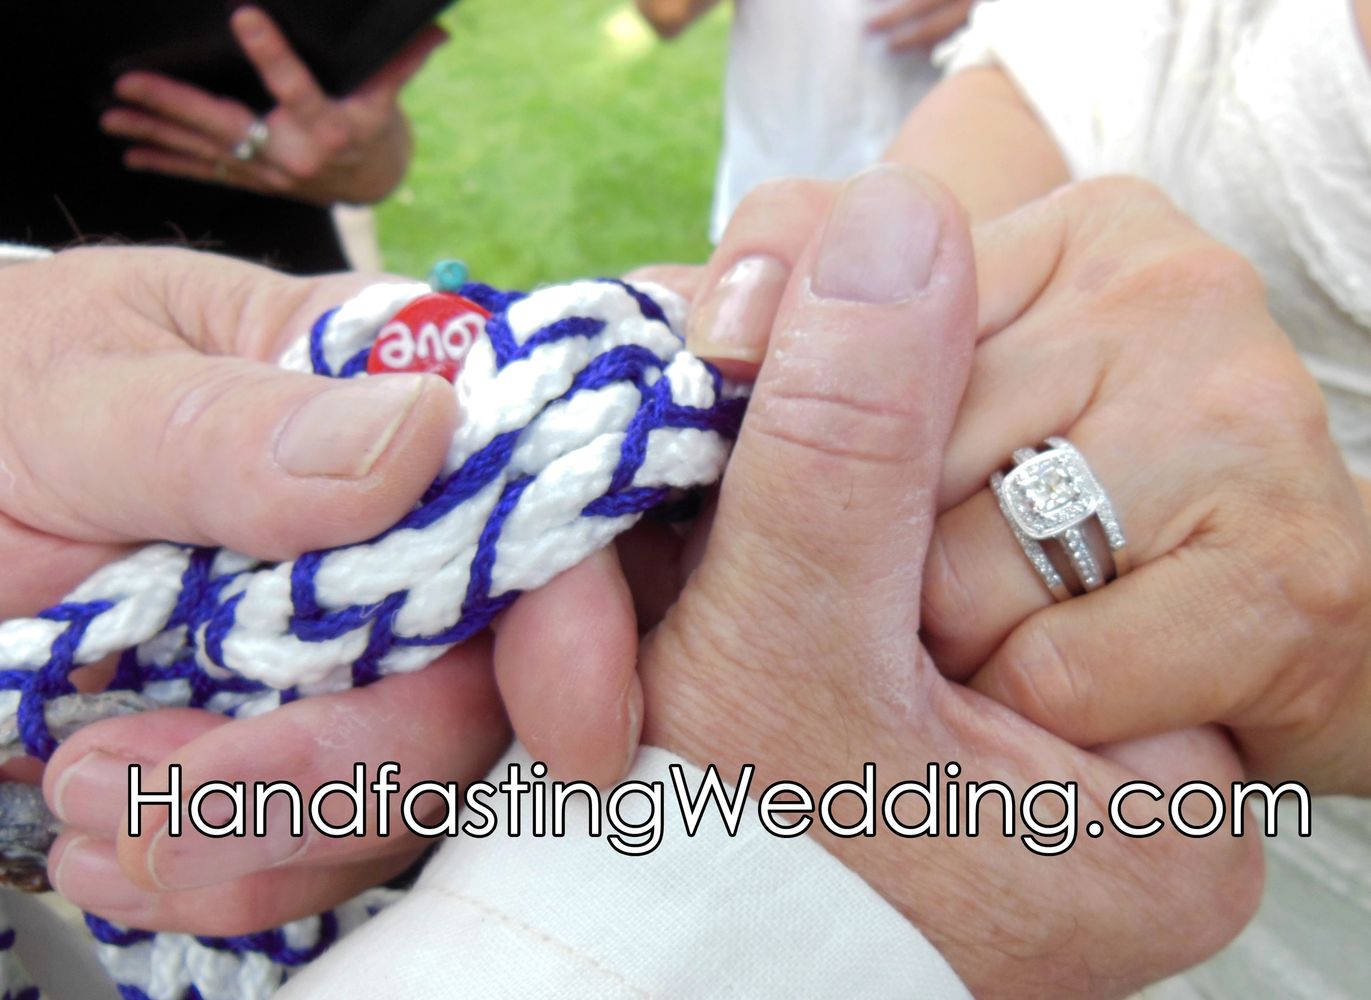 pagan handfasting cords, witch, wiccan wedding